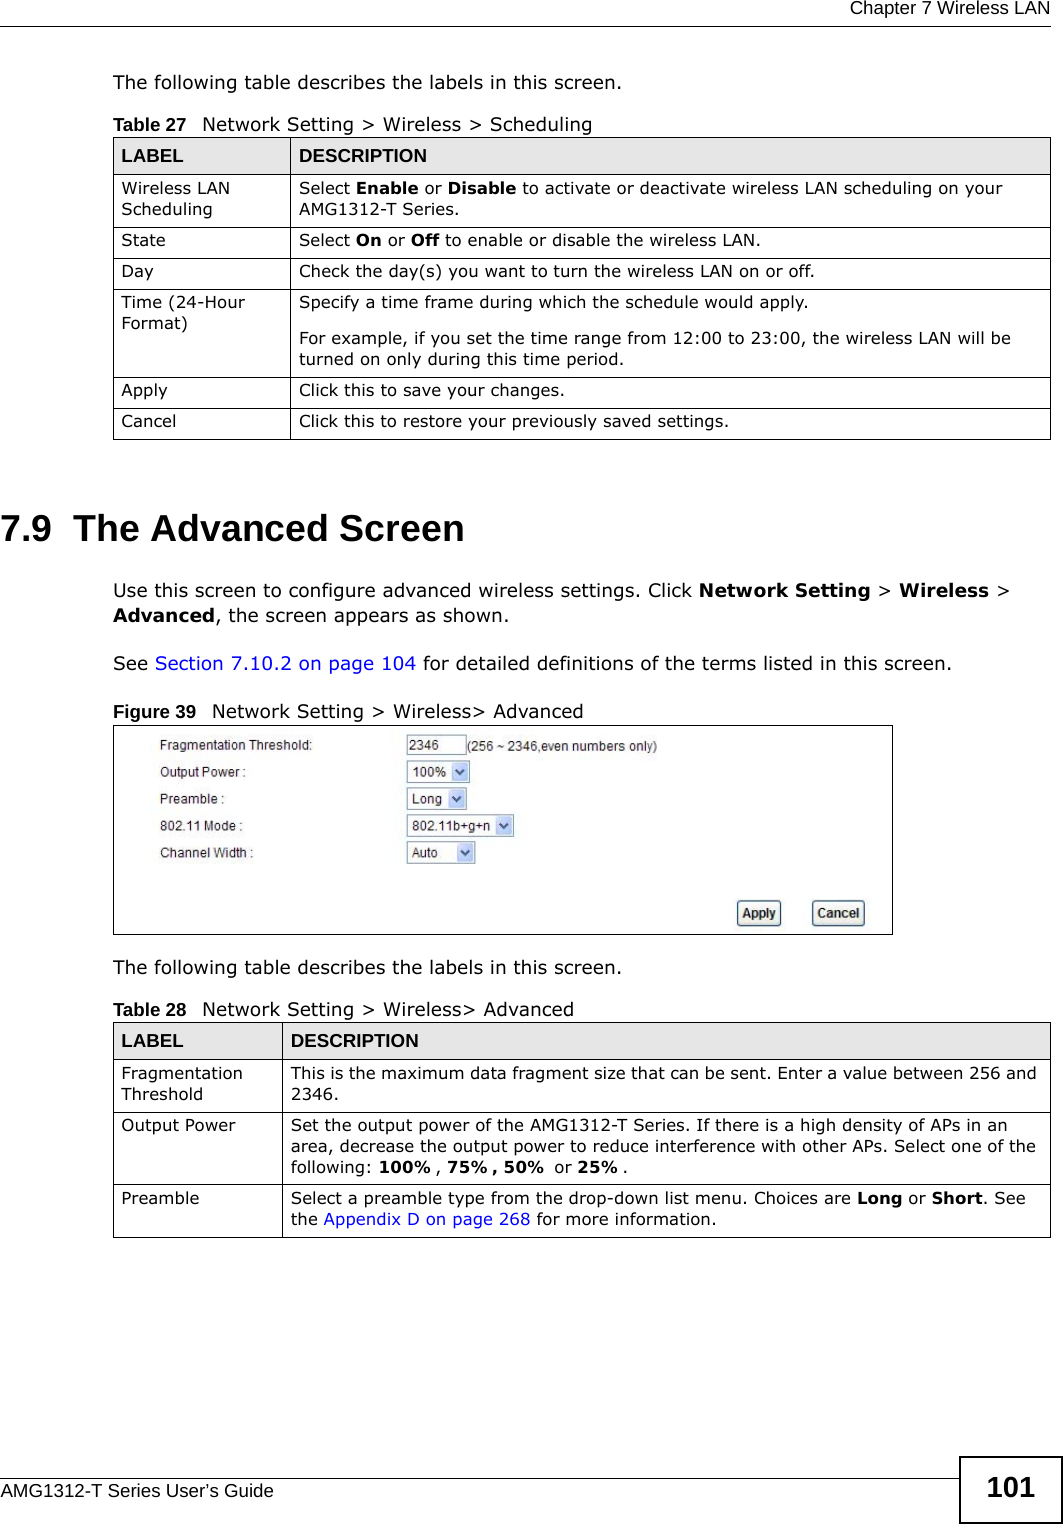  Chapter 7 Wireless LANAMG1312-T Series User’s Guide 101The following table describes the labels in this screen.7.9  The Advanced ScreenUse this screen to configure advanced wireless settings. Click Network Setting &gt; Wireless &gt; Advanced, the screen appears as shown.See Section 7.10.2 on page 104 for detailed definitions of the terms listed in this screen.Figure 39   Network Setting &gt; Wireless&gt; AdvancedThe following table describes the labels in this screen. Table 27   Network Setting &gt; Wireless &gt; SchedulingLABEL DESCRIPTIONWireless LAN SchedulingSelect Enable or Disable to activate or deactivate wireless LAN scheduling on your AMG1312-T Series.State Select On or Off to enable or disable the wireless LAN.Day Check the day(s) you want to turn the wireless LAN on or off.Time (24-Hour Format)Specify a time frame during which the schedule would apply.For example, if you set the time range from 12:00 to 23:00, the wireless LAN will be turned on only during this time period.Apply Click this to save your changes.Cancel Click this to restore your previously saved settings.Table 28   Network Setting &gt; Wireless&gt; AdvancedLABEL DESCRIPTIONFragmentation ThresholdThis is the maximum data fragment size that can be sent. Enter a value between 256 and 2346. Output Power Set the output power of the AMG1312-T Series. If there is a high density of APs in an area, decrease the output power to reduce interference with other APs. Select one of the following: 100%, 75%, 50% or 25%. Preamble Select a preamble type from the drop-down list menu. Choices are Long or Short. See the Appendix D on page 268 for more information.